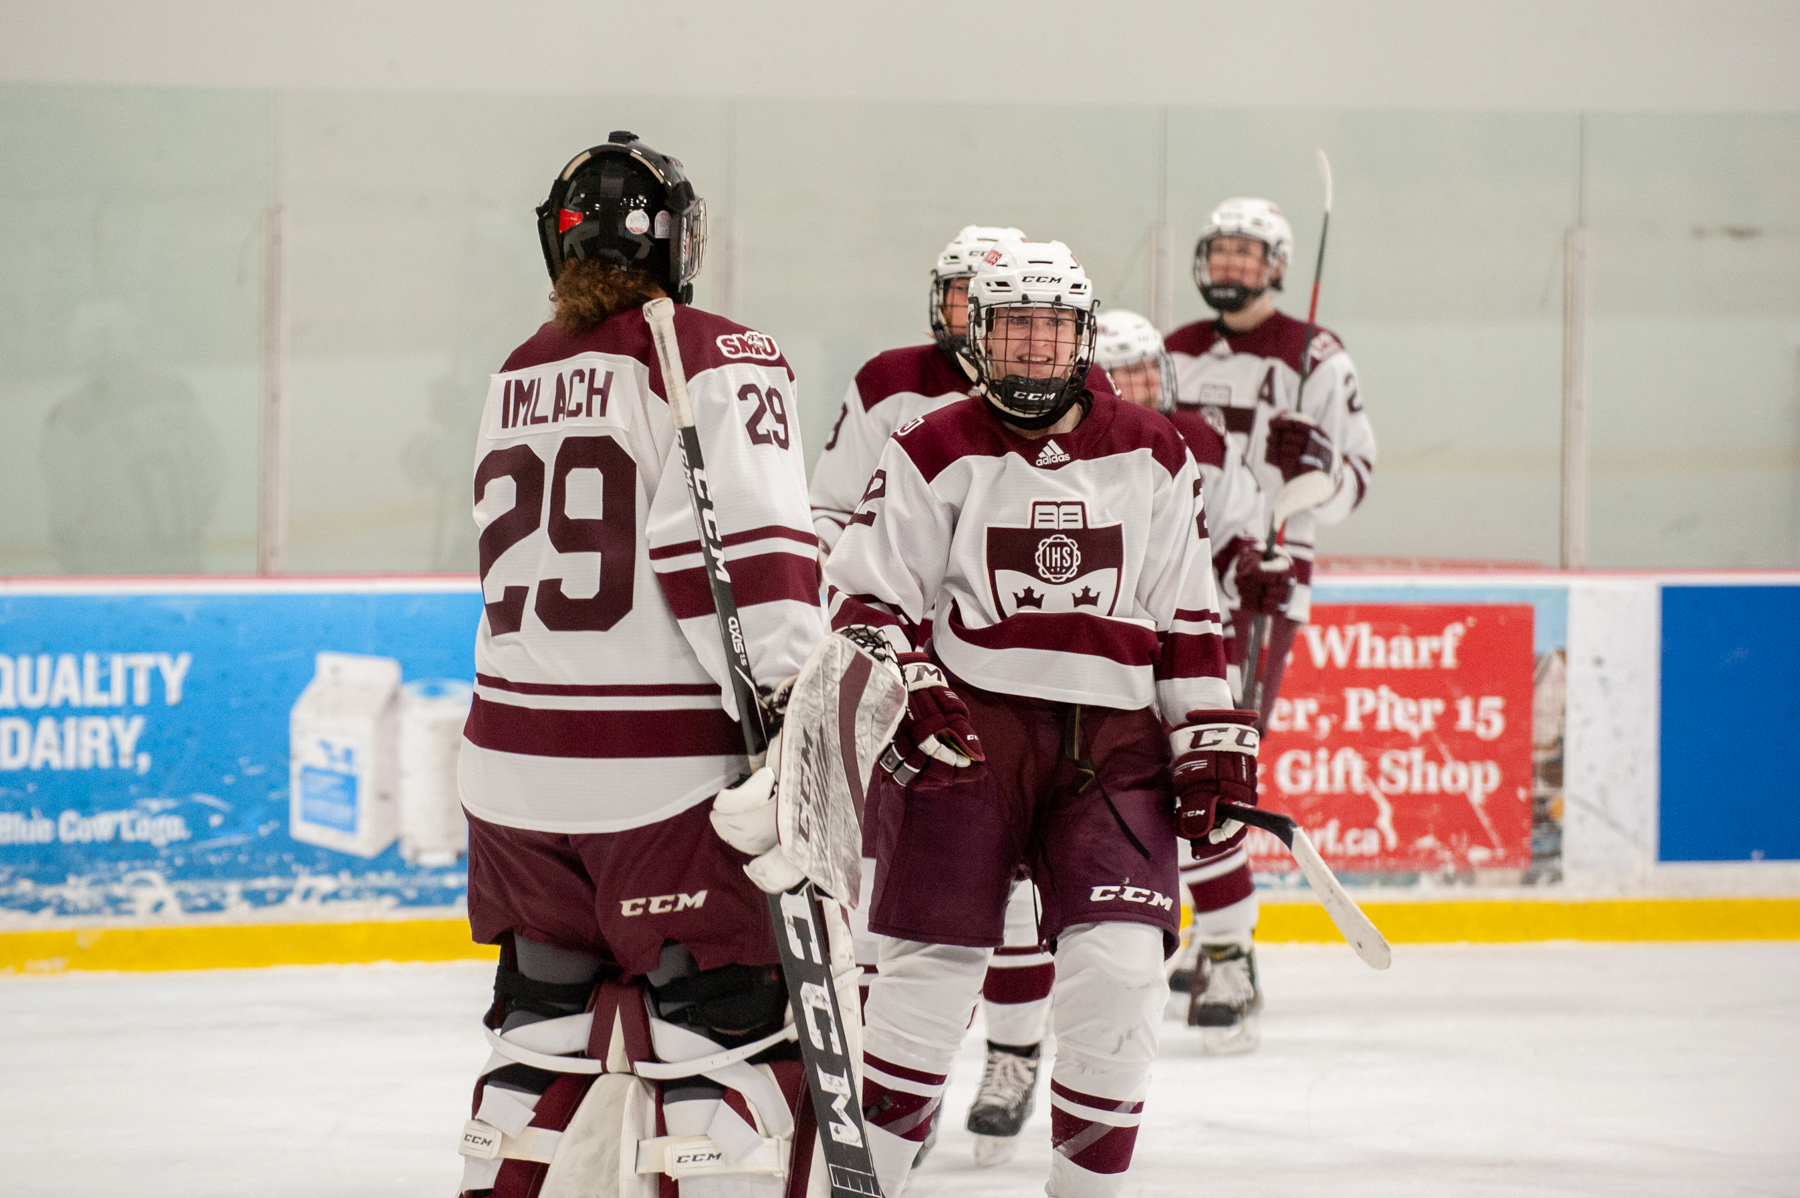 Huskies goaltender Ashley Imlach is congratulated by her teammates after the Huskies 4-2 win over UPEI on Saturday, March 5, 2022.